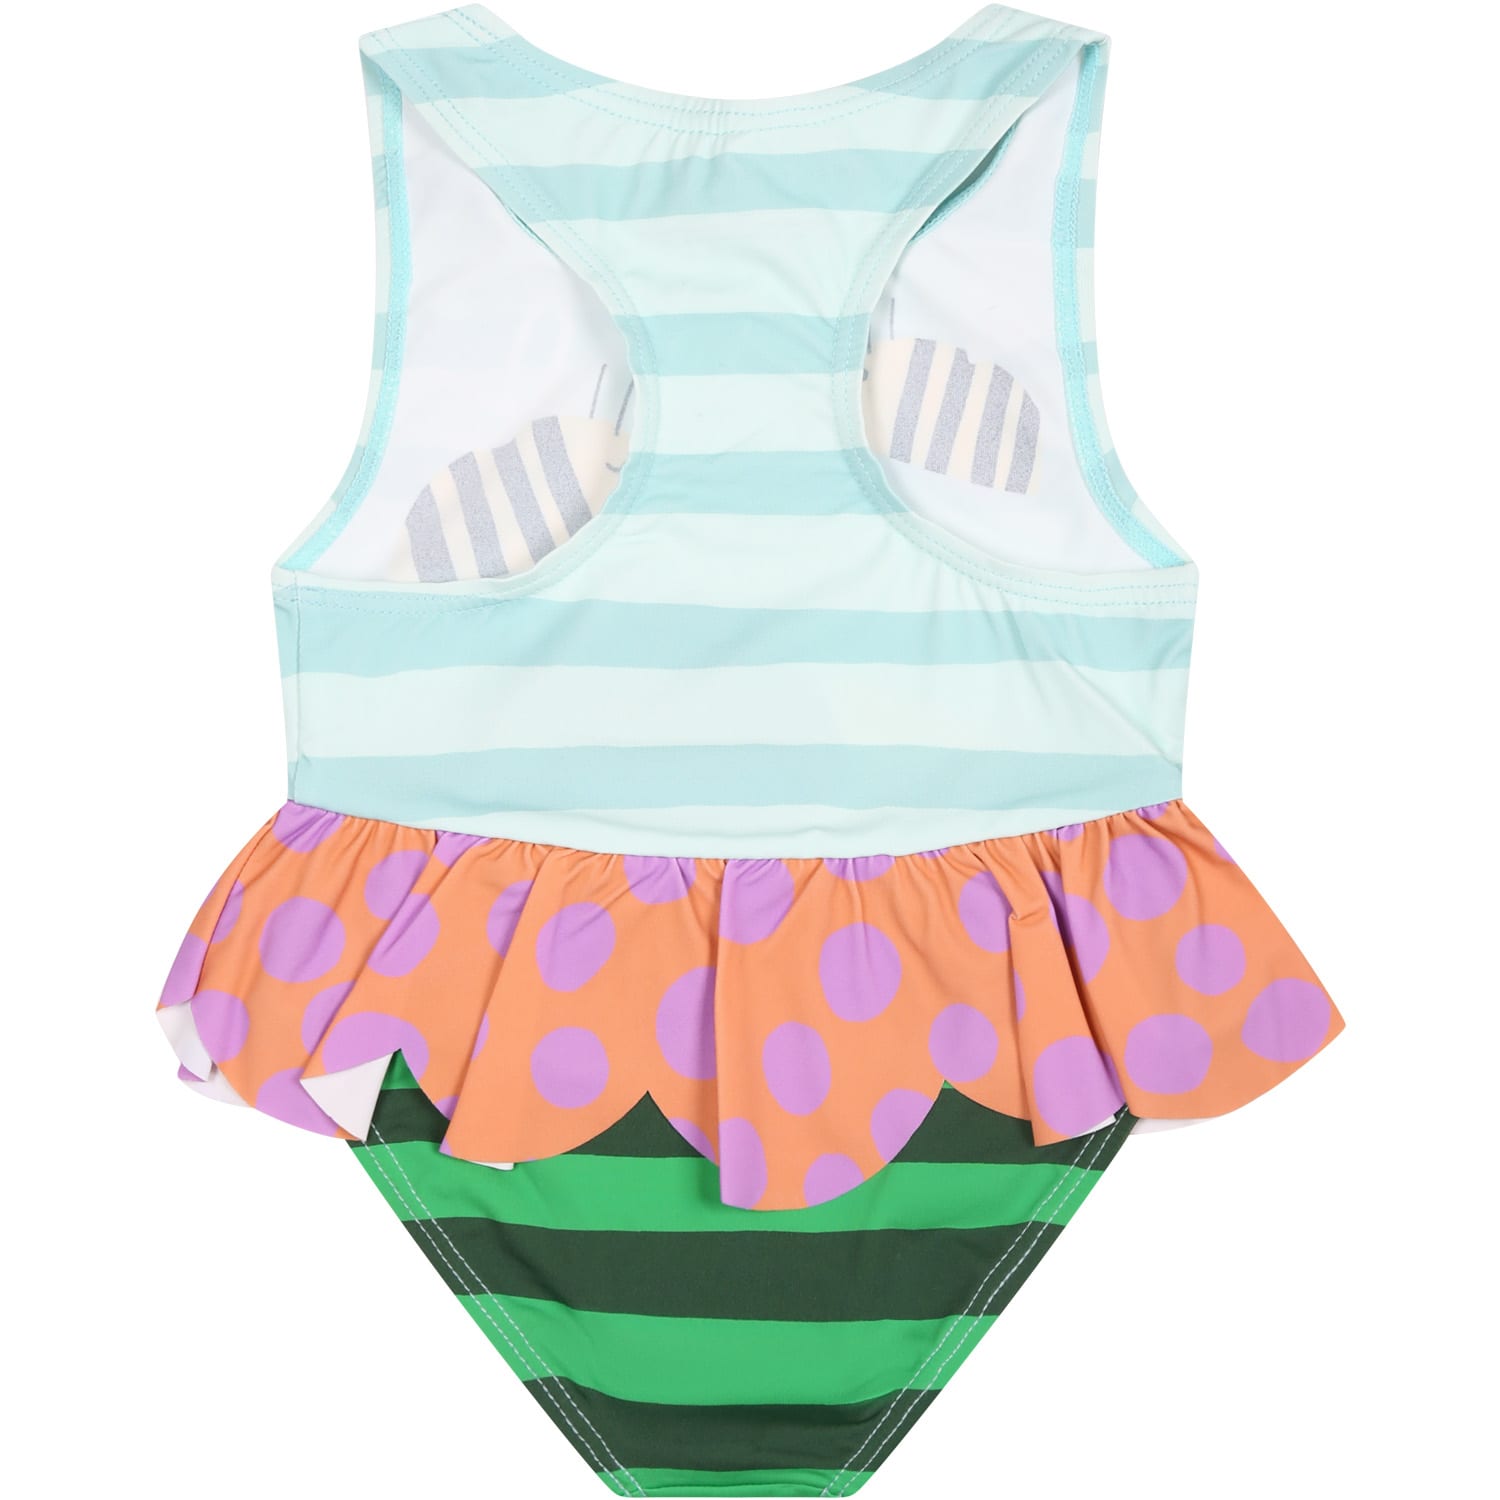 Shop Stella Mccartney Light Blue Swimsuit For Baby Girl With Bees